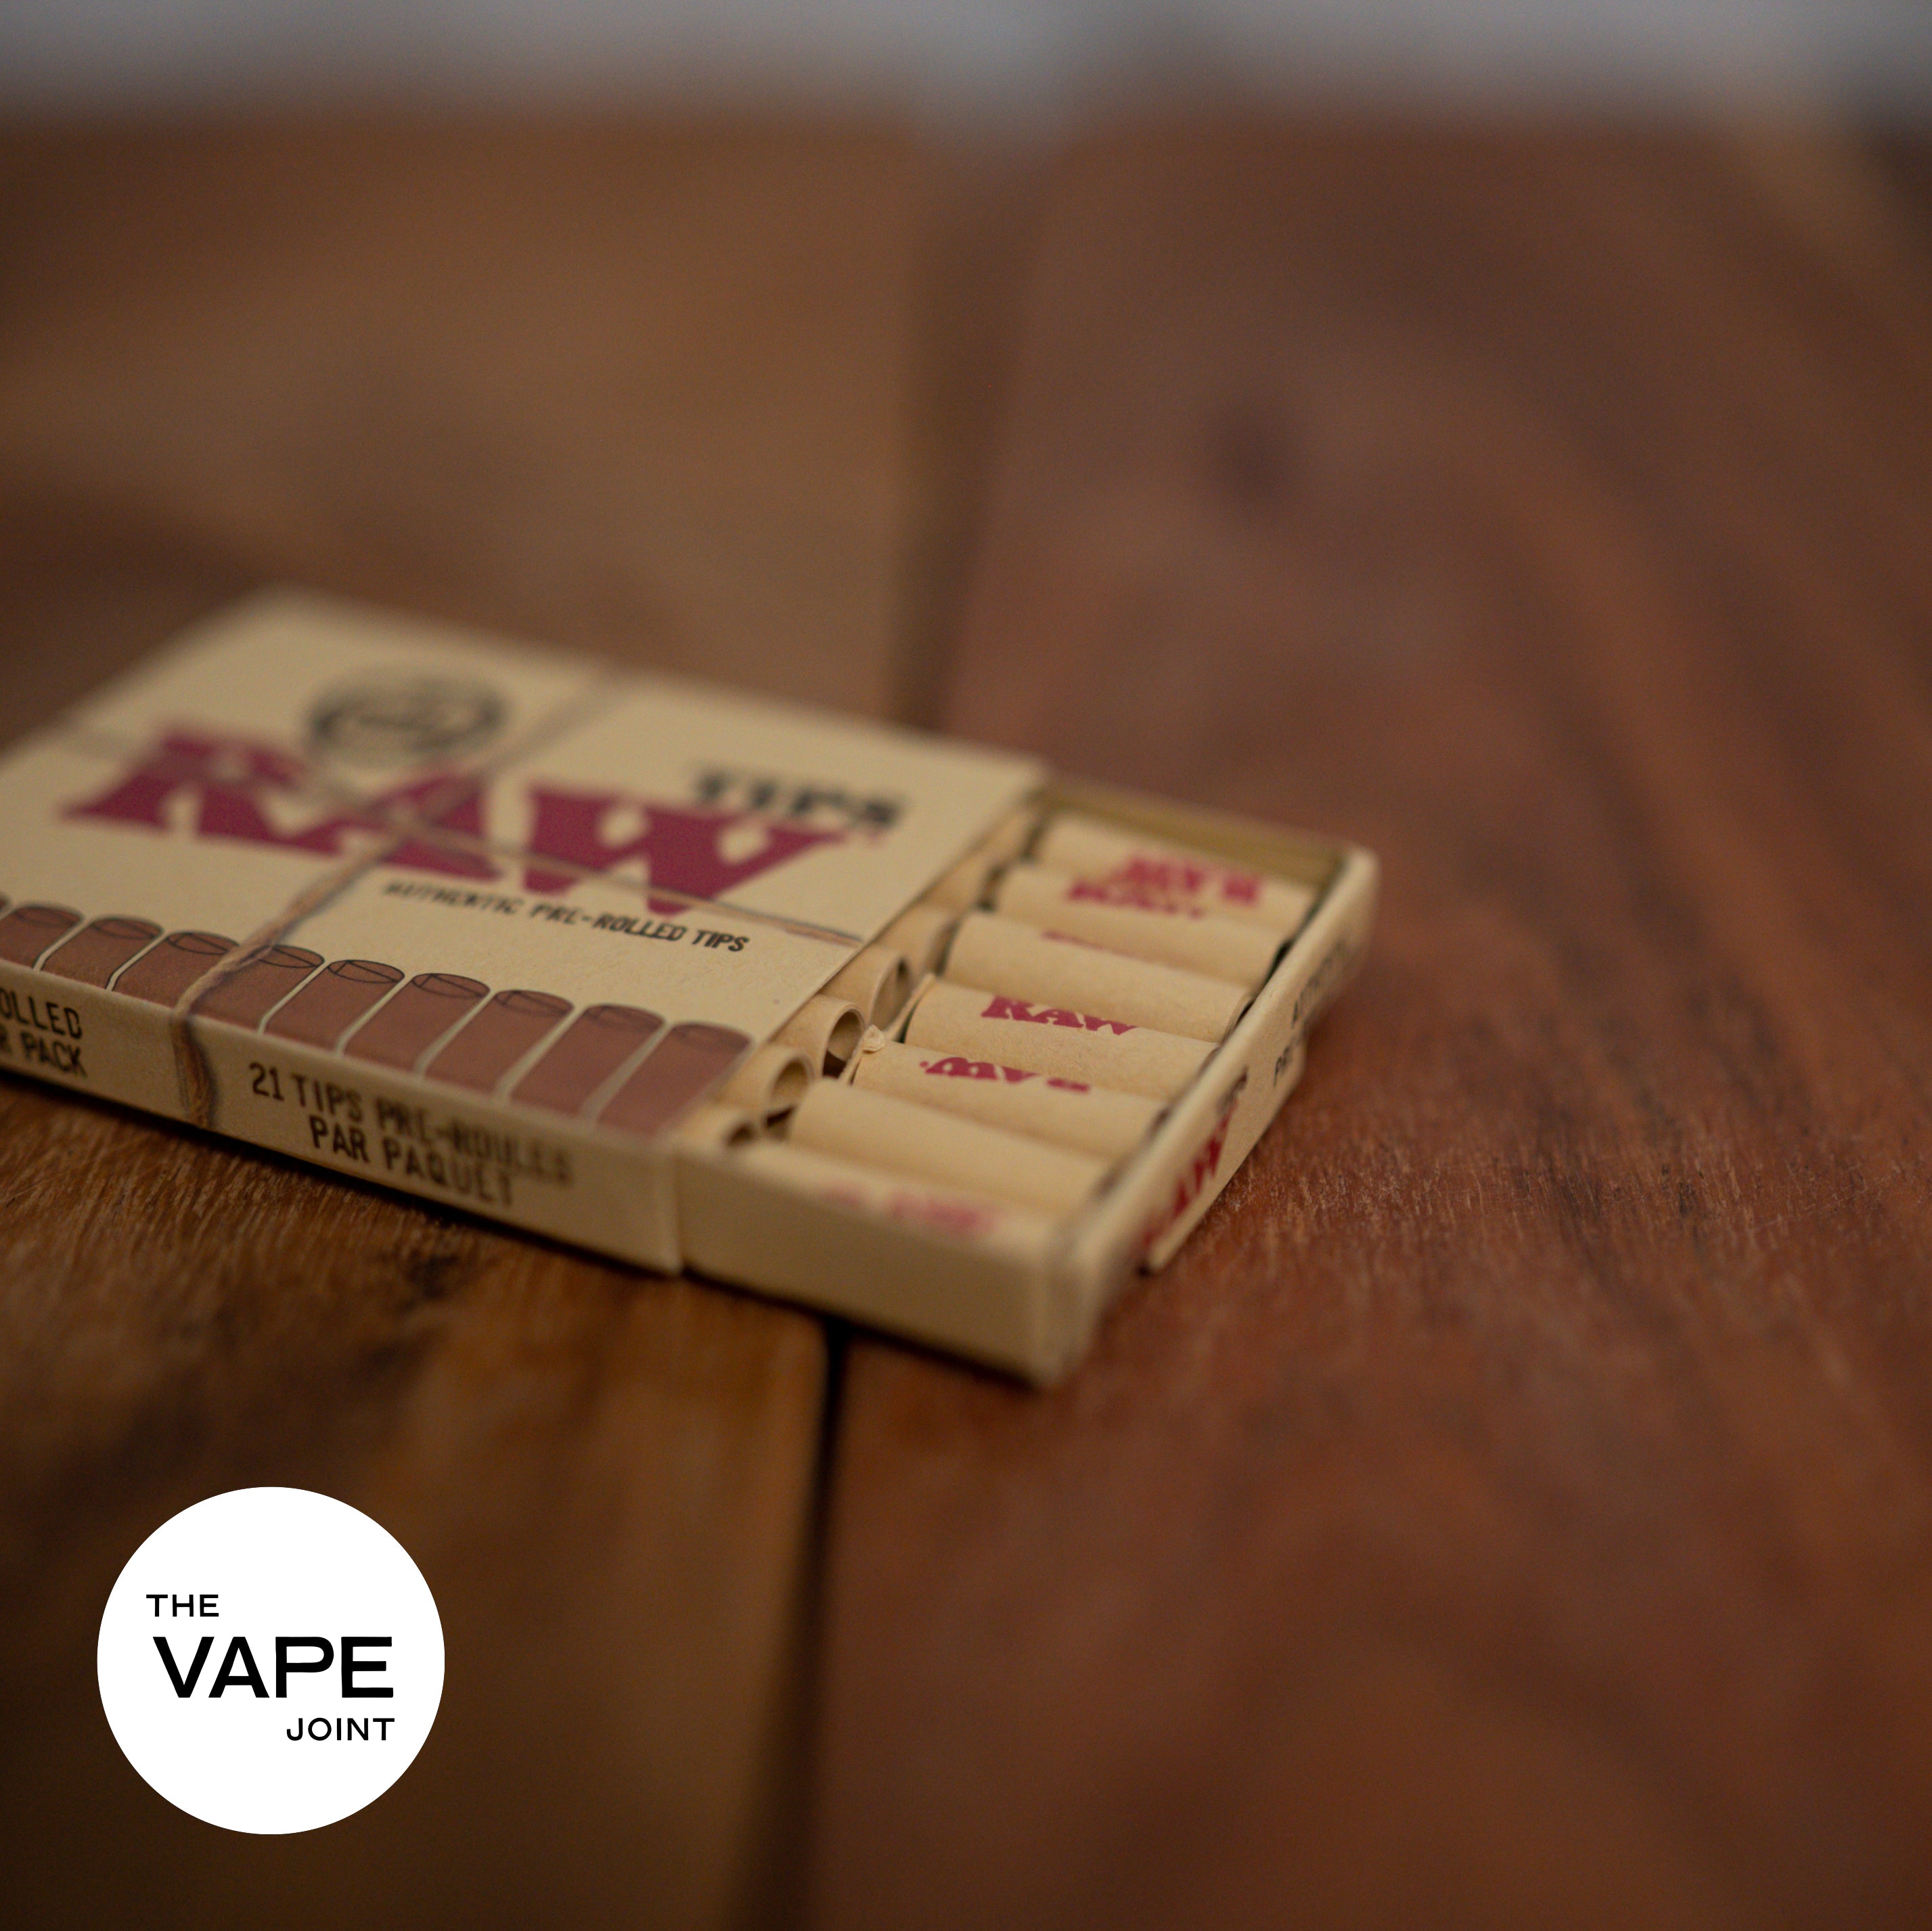 Raw Natural Pre Rolled Tips - 21 Tip Pack